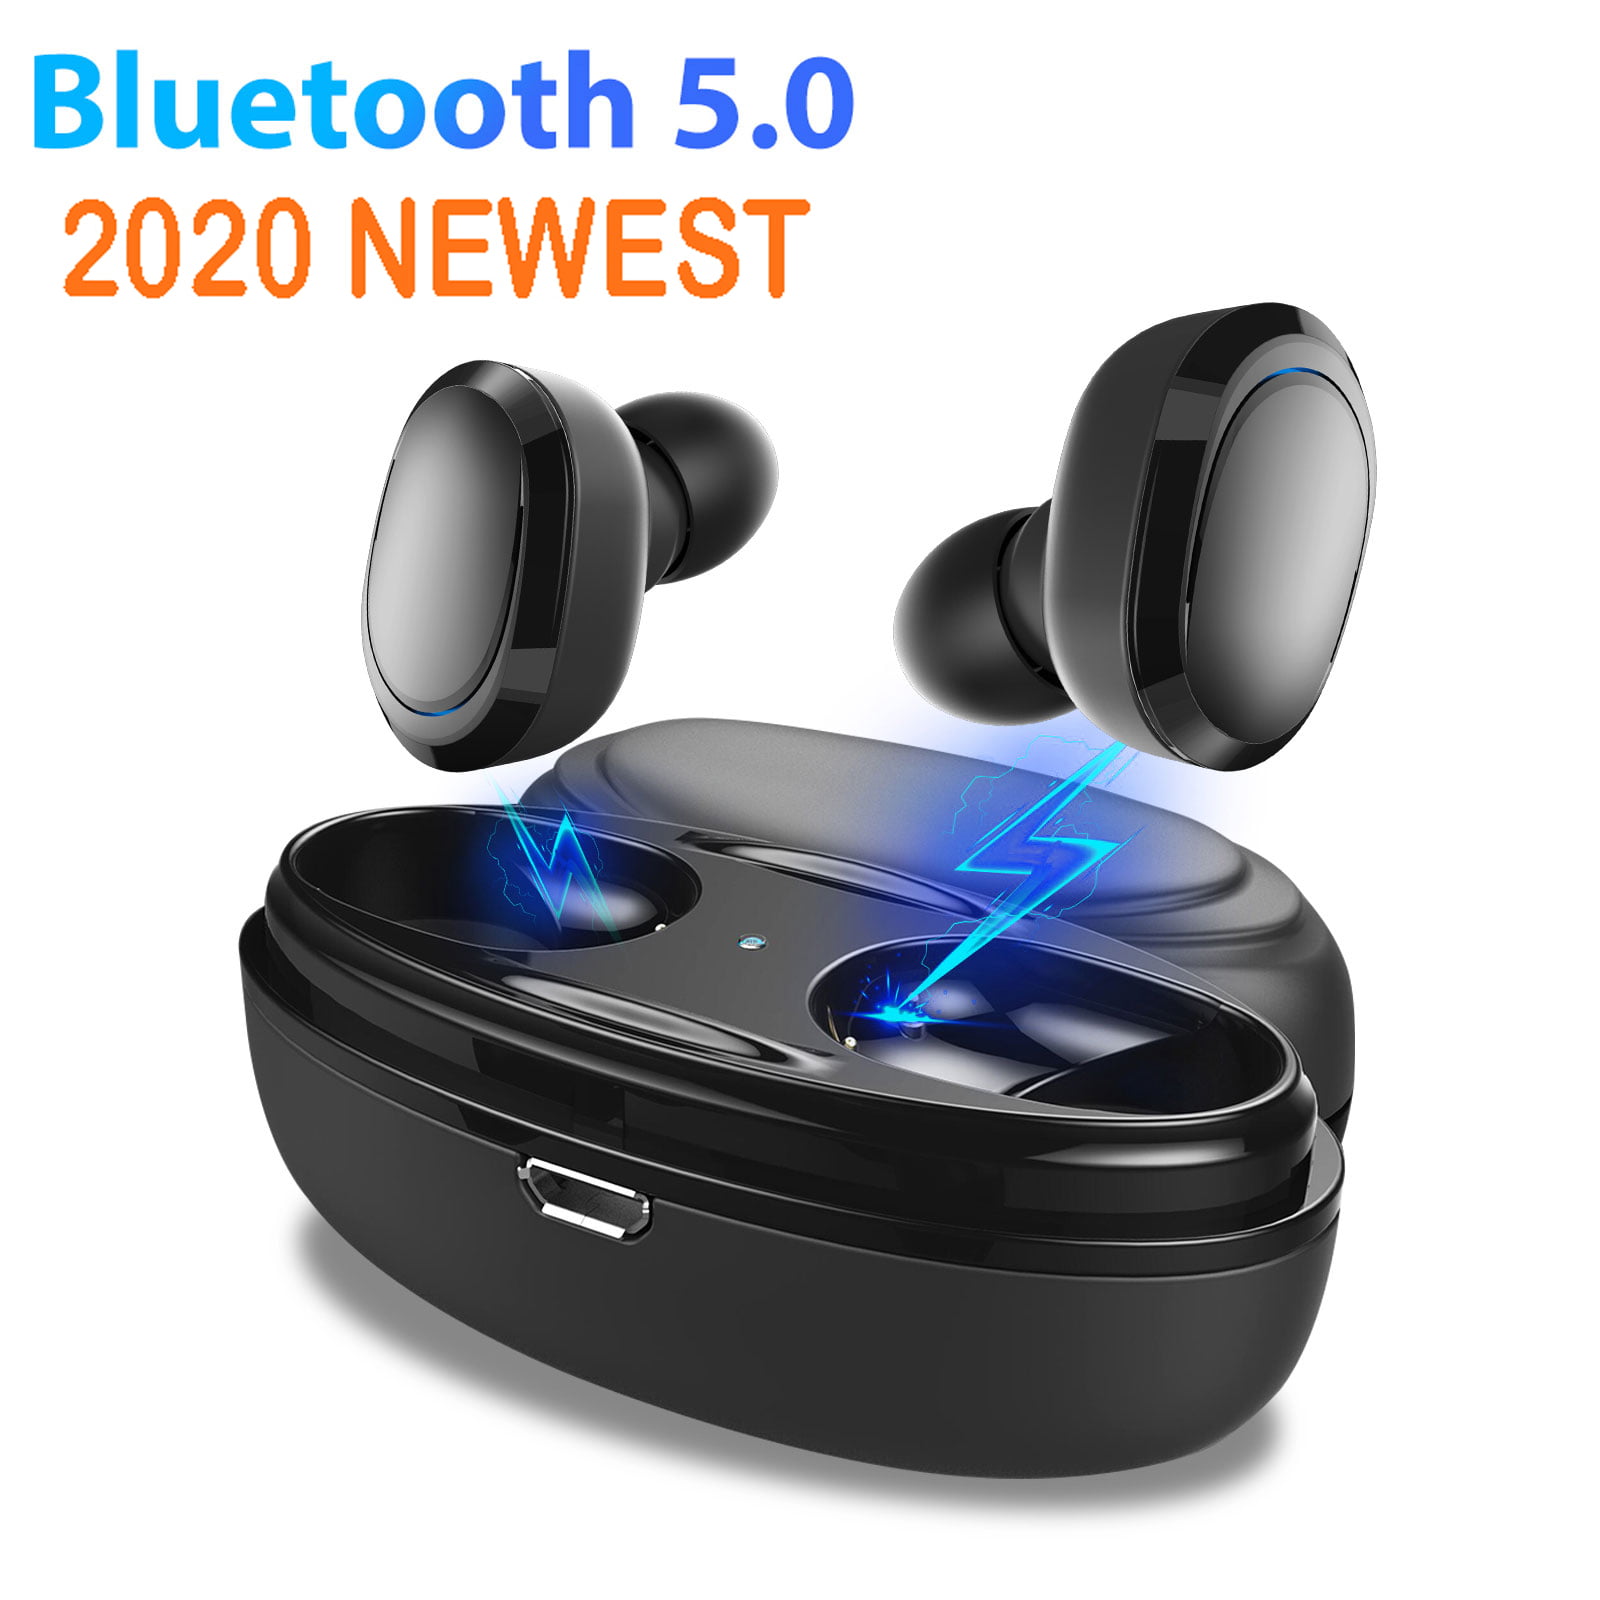 Mini Wireless Earbuds, 2020 Upgrade Bluetooth Earphone Smallest Wireless Invisible Headset Headphone with Mic Hands-free Calling for iPhone Samsung and Android Smart Phones